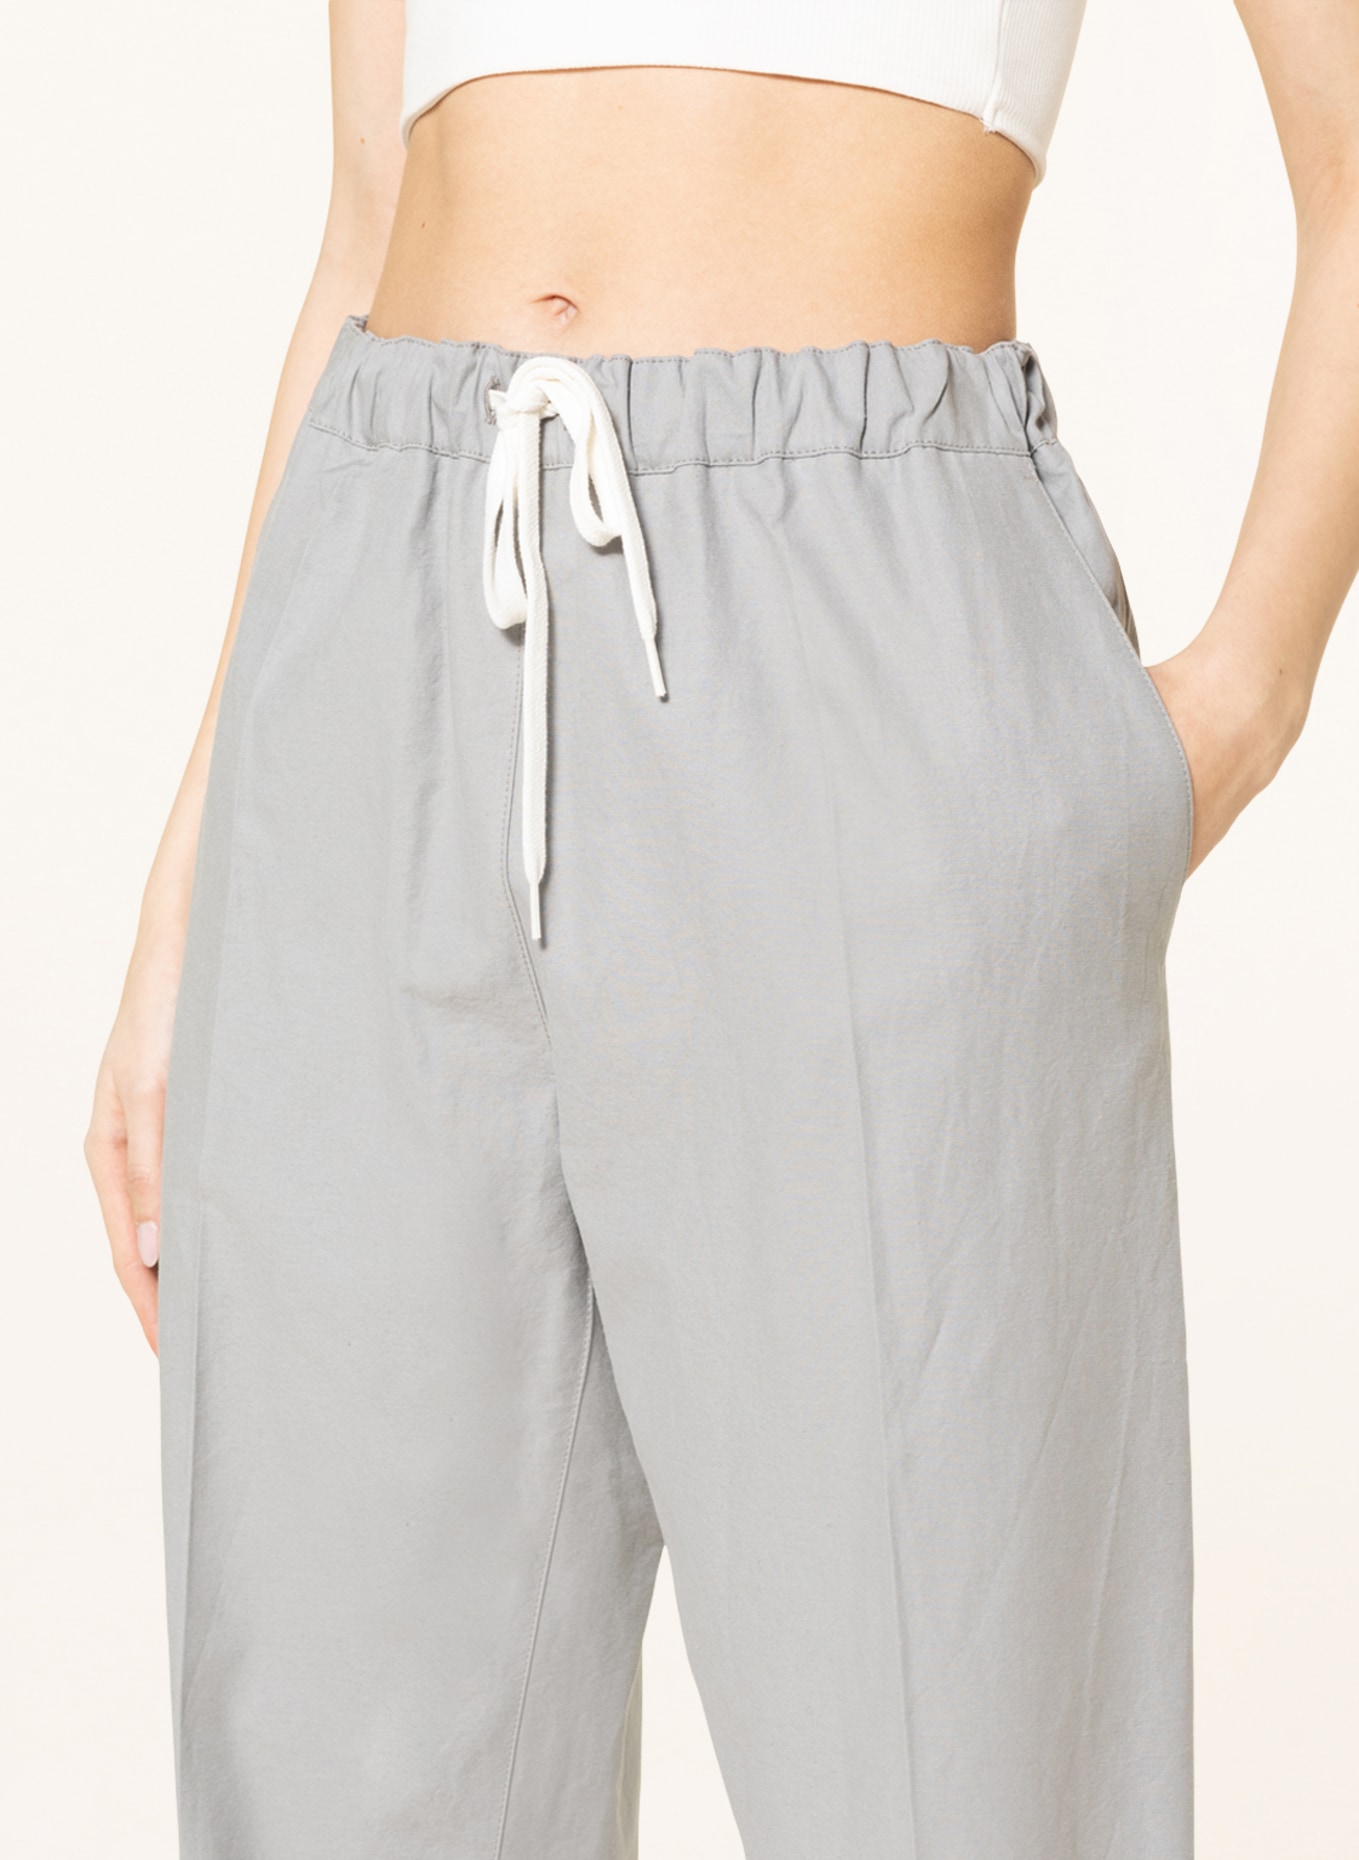 MM6 Maison Margiela Pants in jogger style, Color: LIGHT GRAY (Image 5)